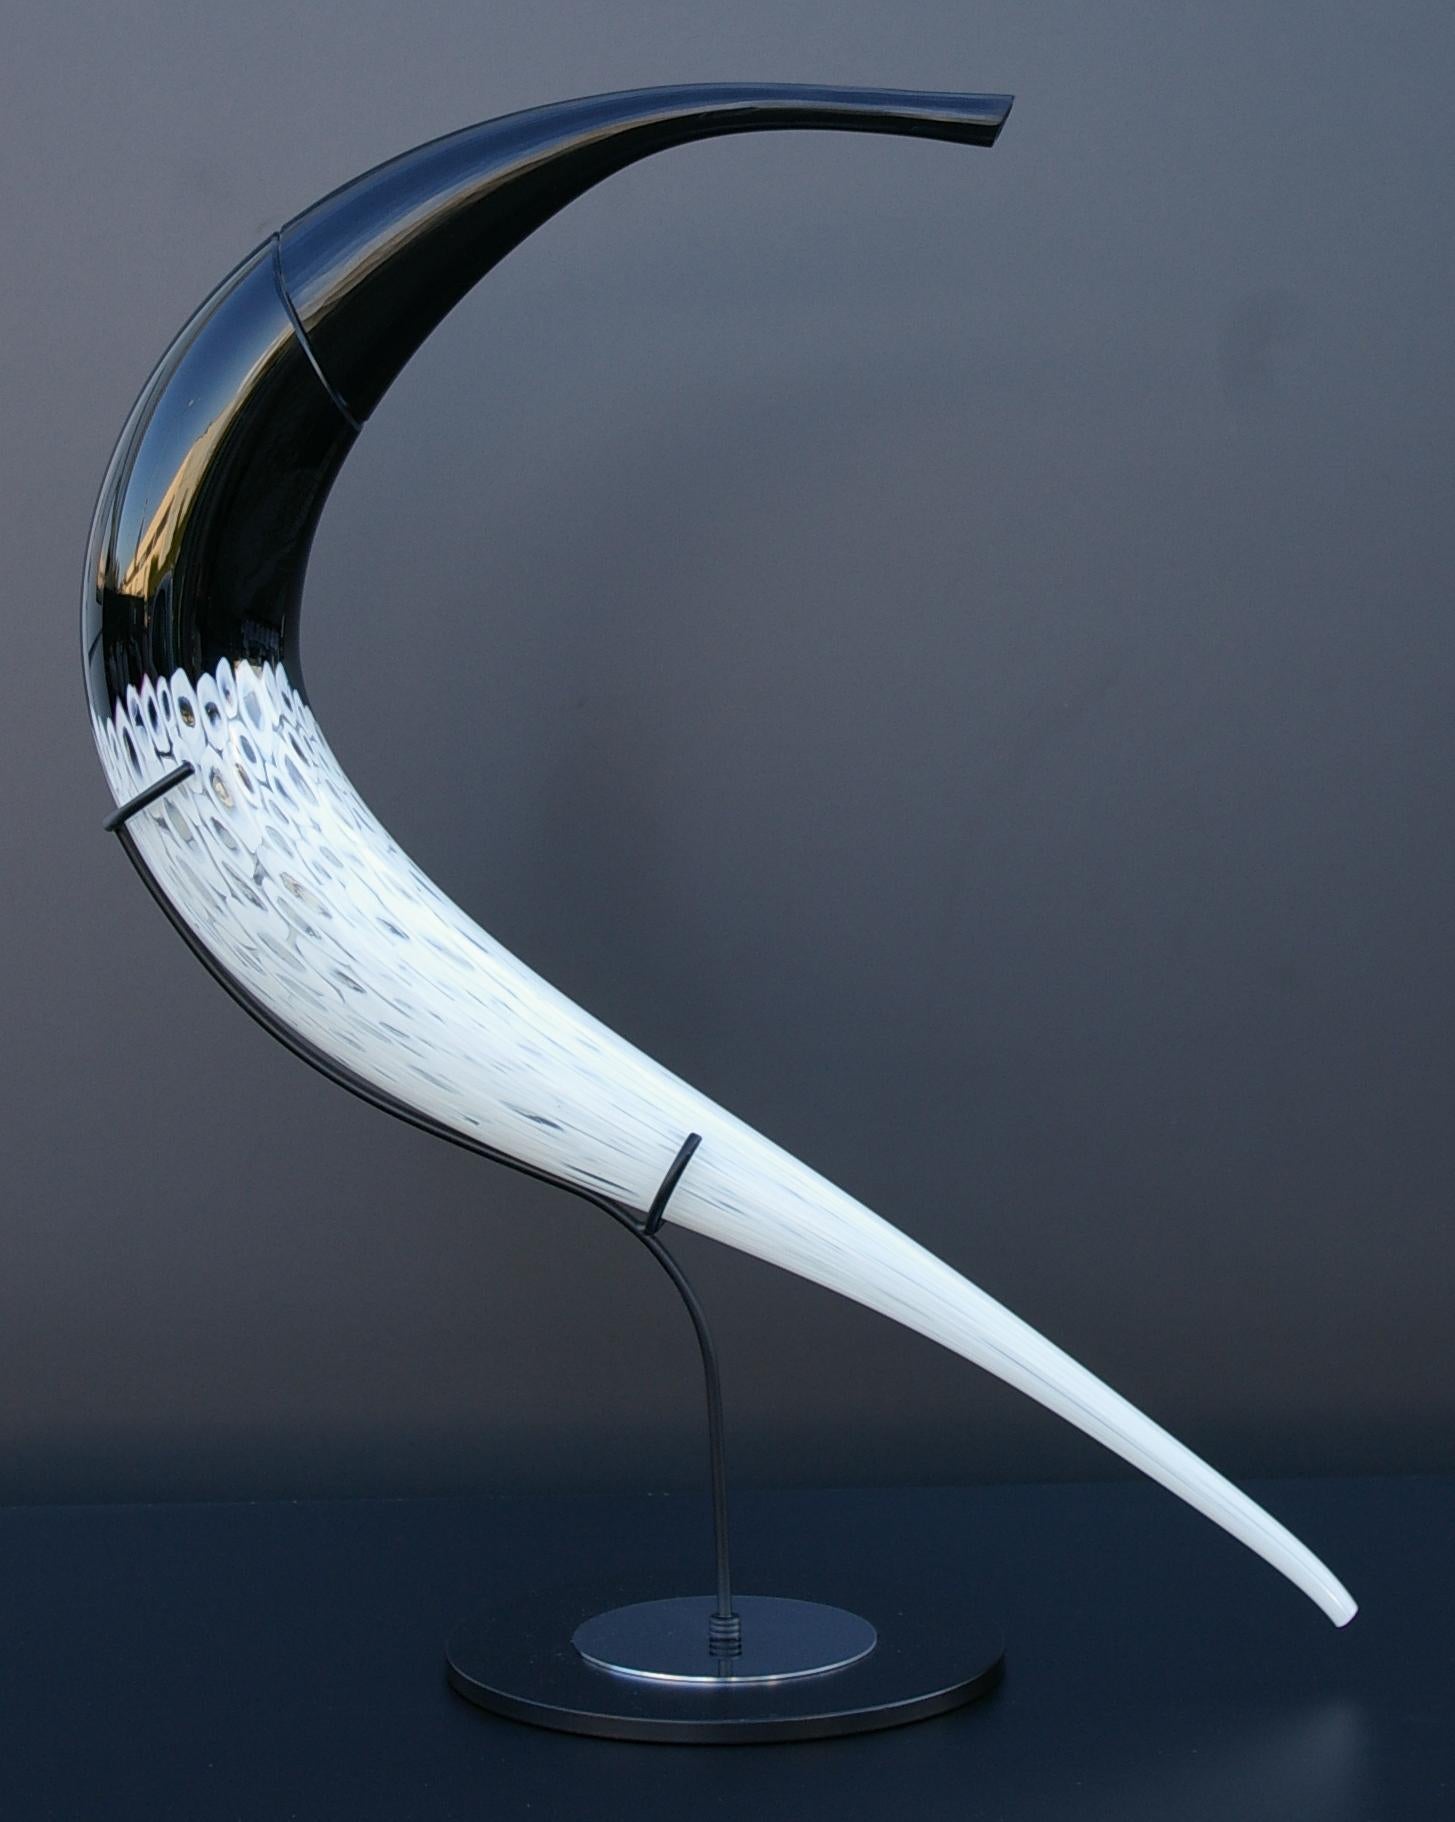 Murano artistic glass. The murano artistic glass sculpture is a creative and natural expression of the artist Eros Raffael, made of Murano blown glass by Eros Raffael, in this sculpture they are enclosed in perfect regular shapes: the harmony, and